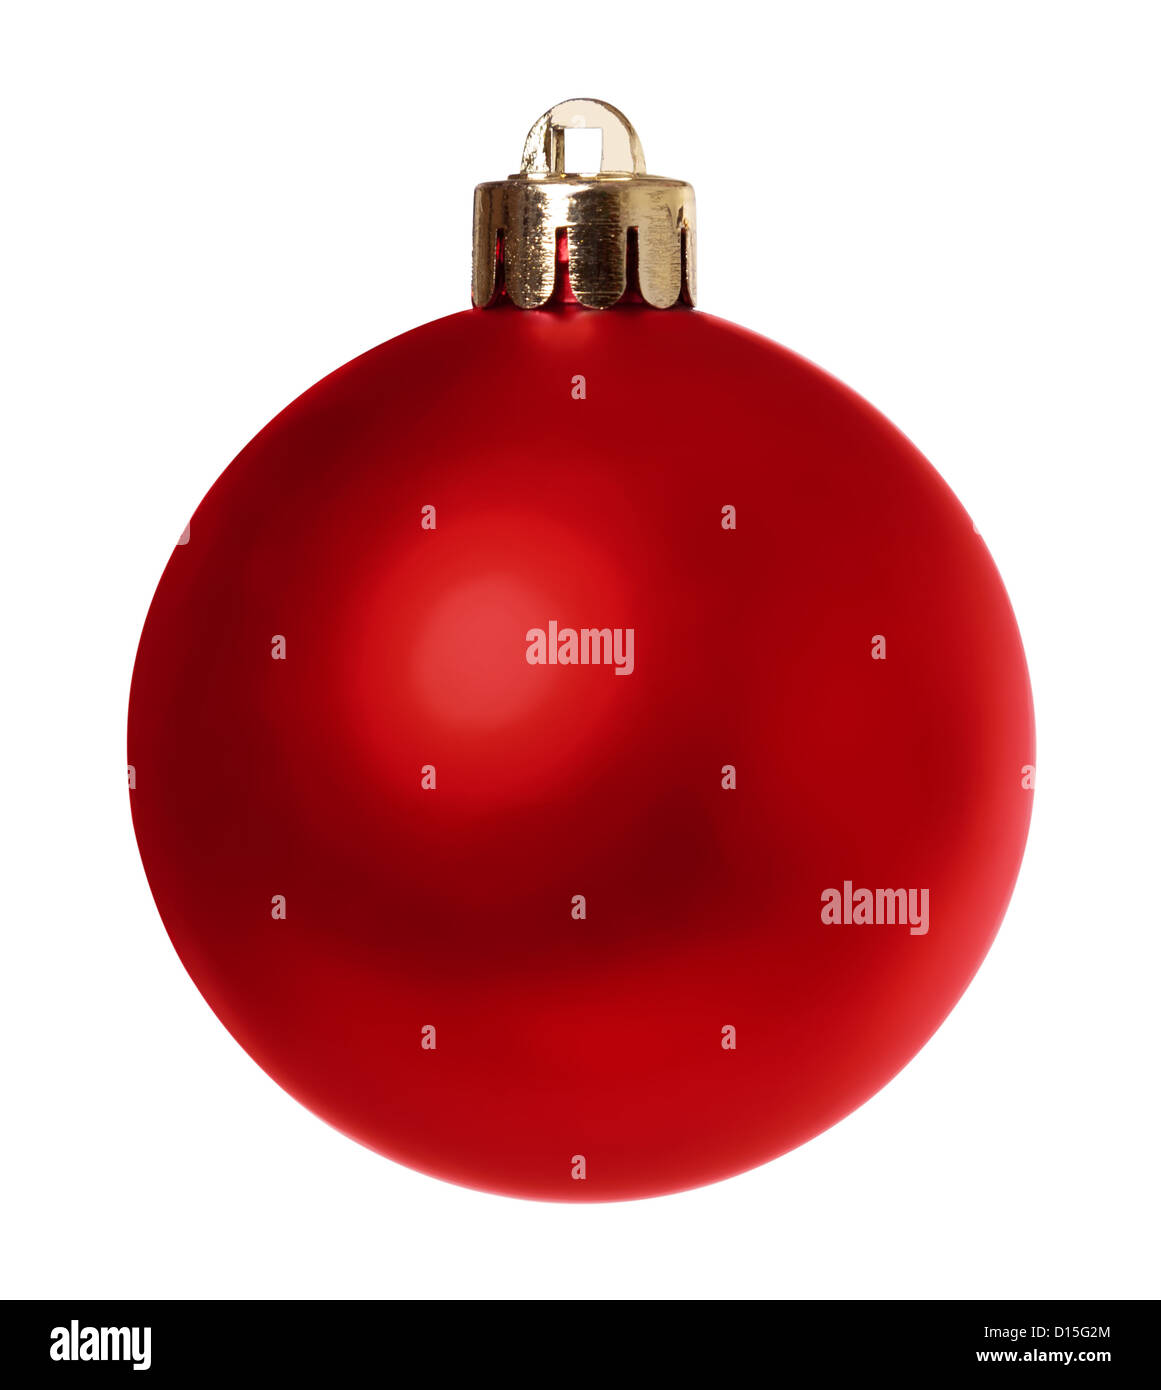 Red Christmas bauble decoration isolated on a white background with clipping path Banque D'Images